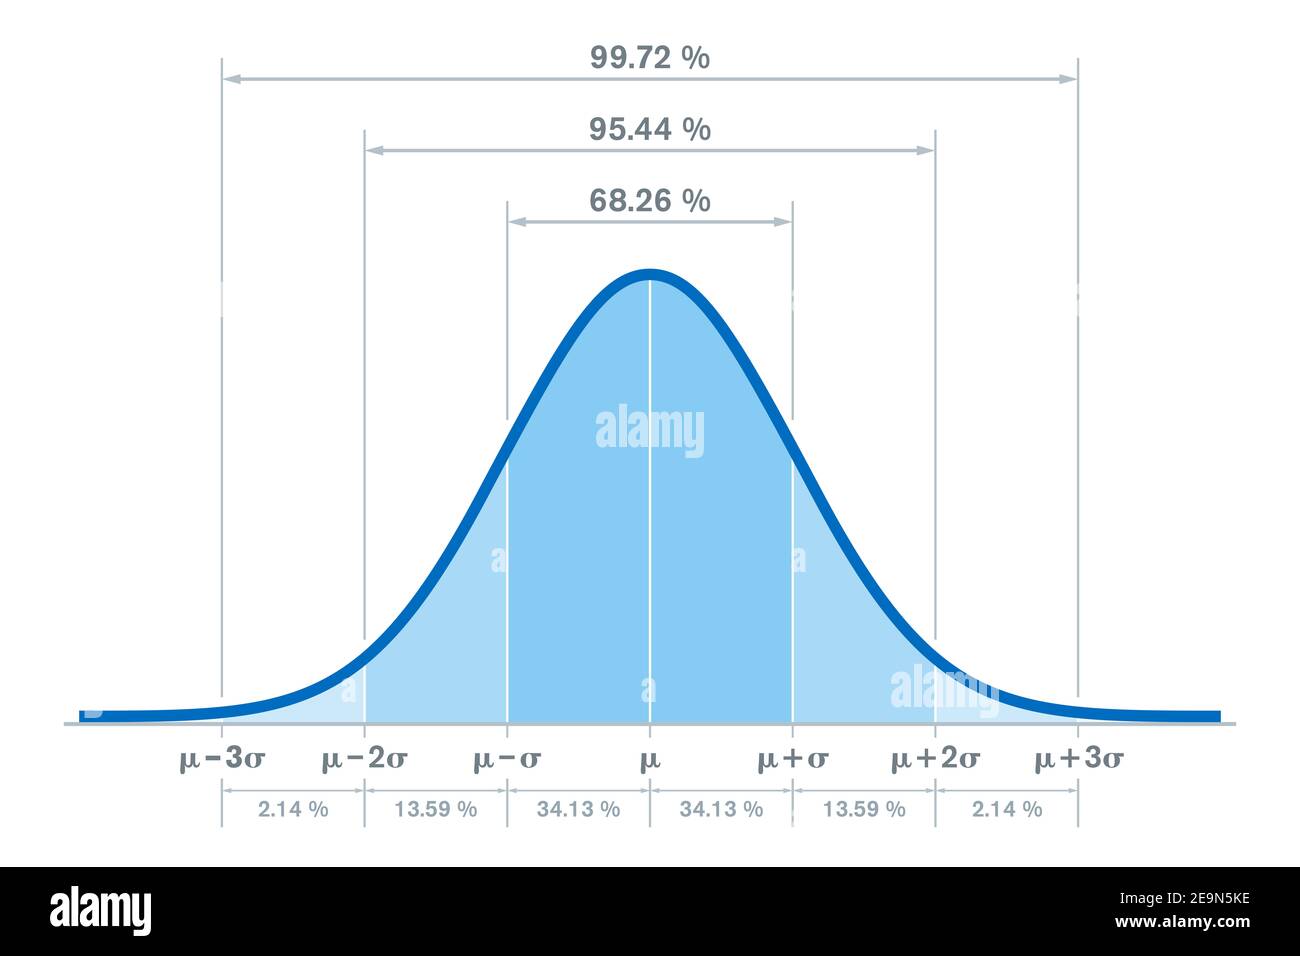 Standard normal distribution, with the percentages for three standard deviations of the mean. Sometimes informally called bell curve. Stock Photo